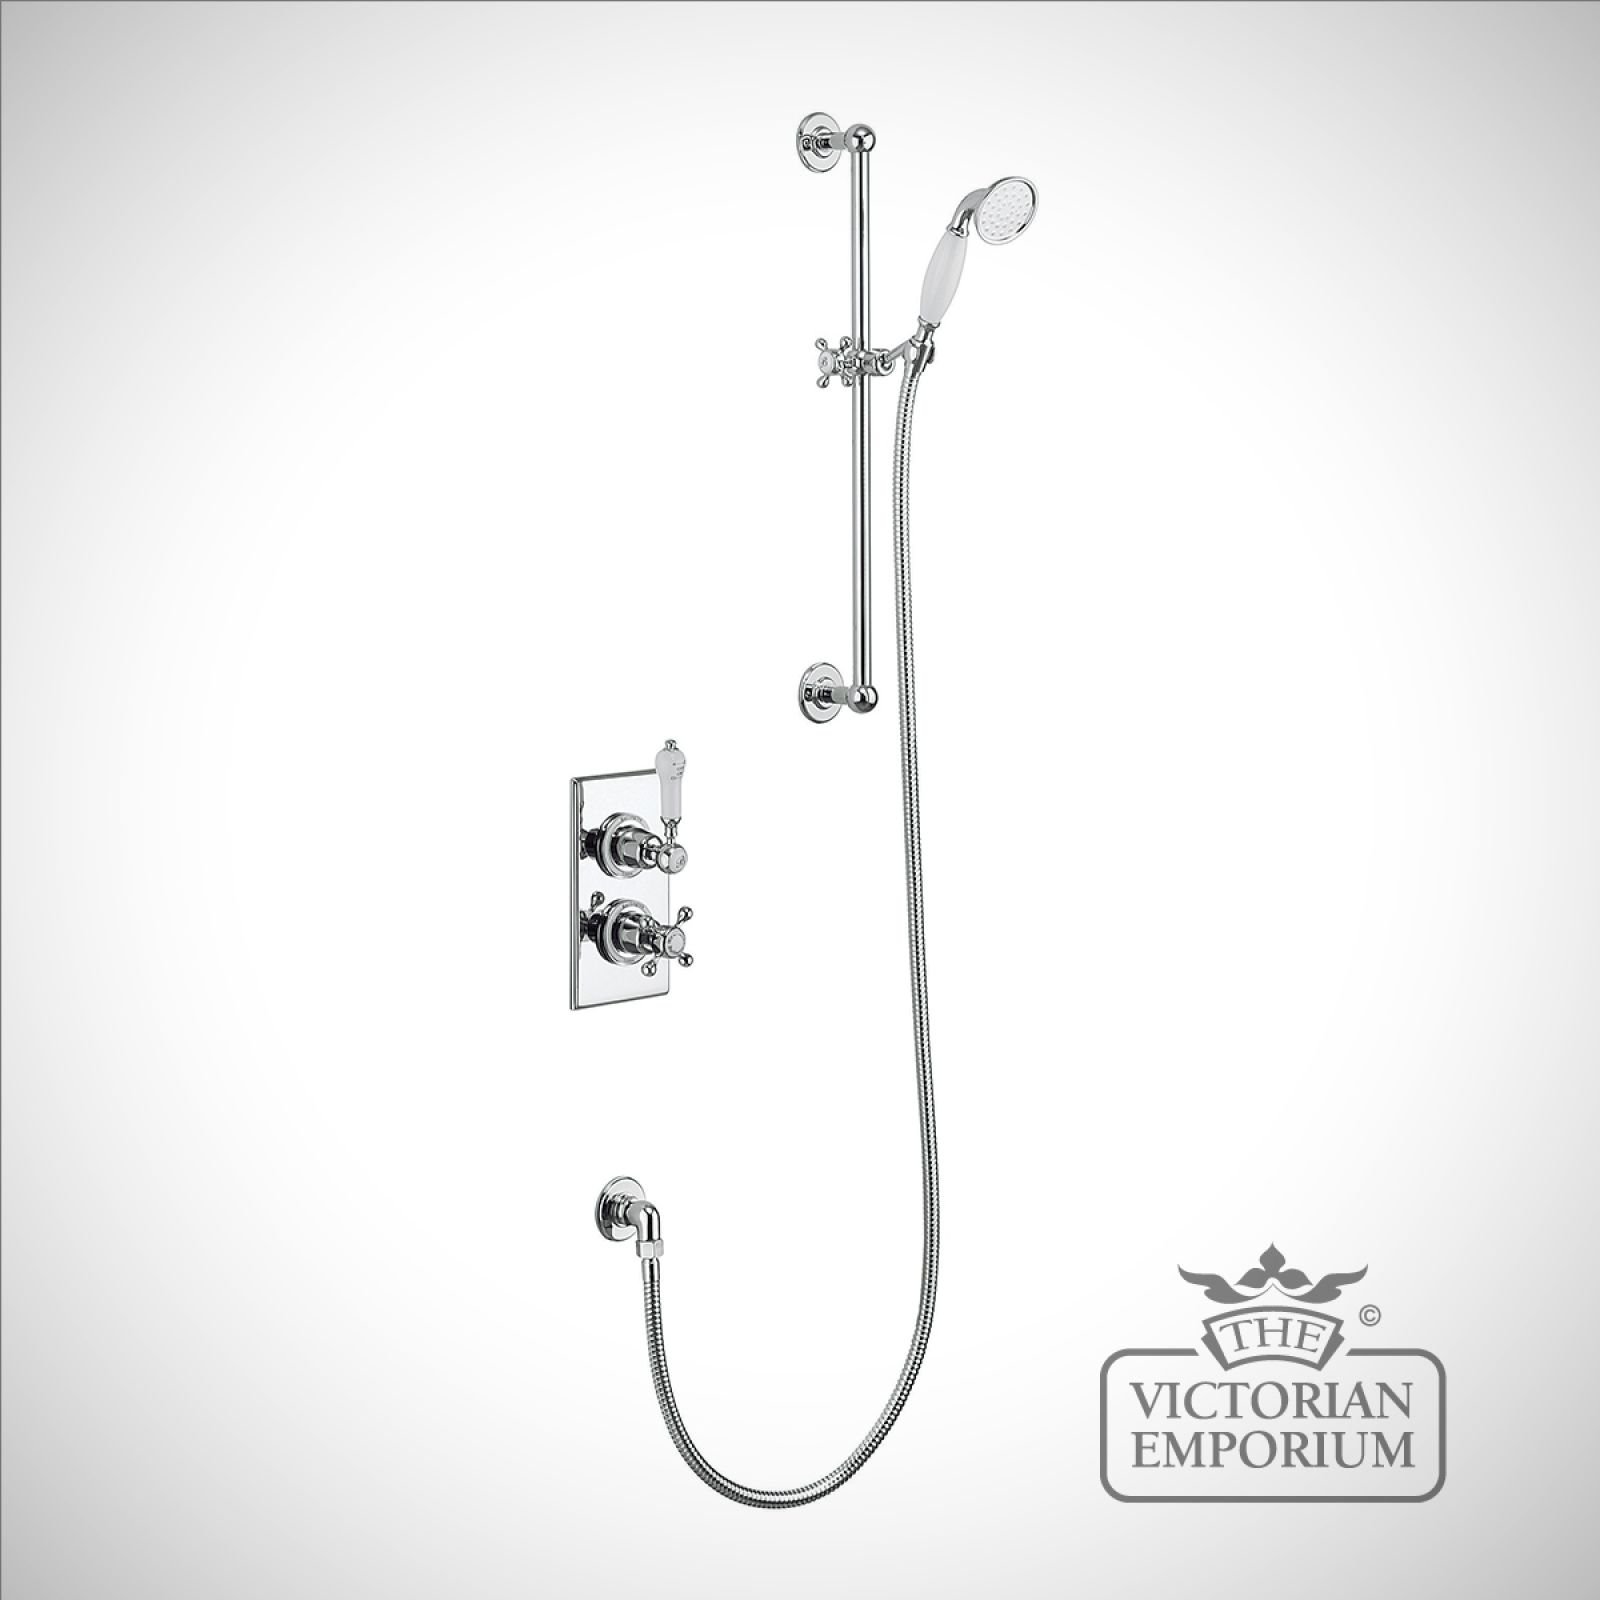 Trenton Thermostatic Single Outlet Concealed Shower Valve with Rail, Hose and Handset